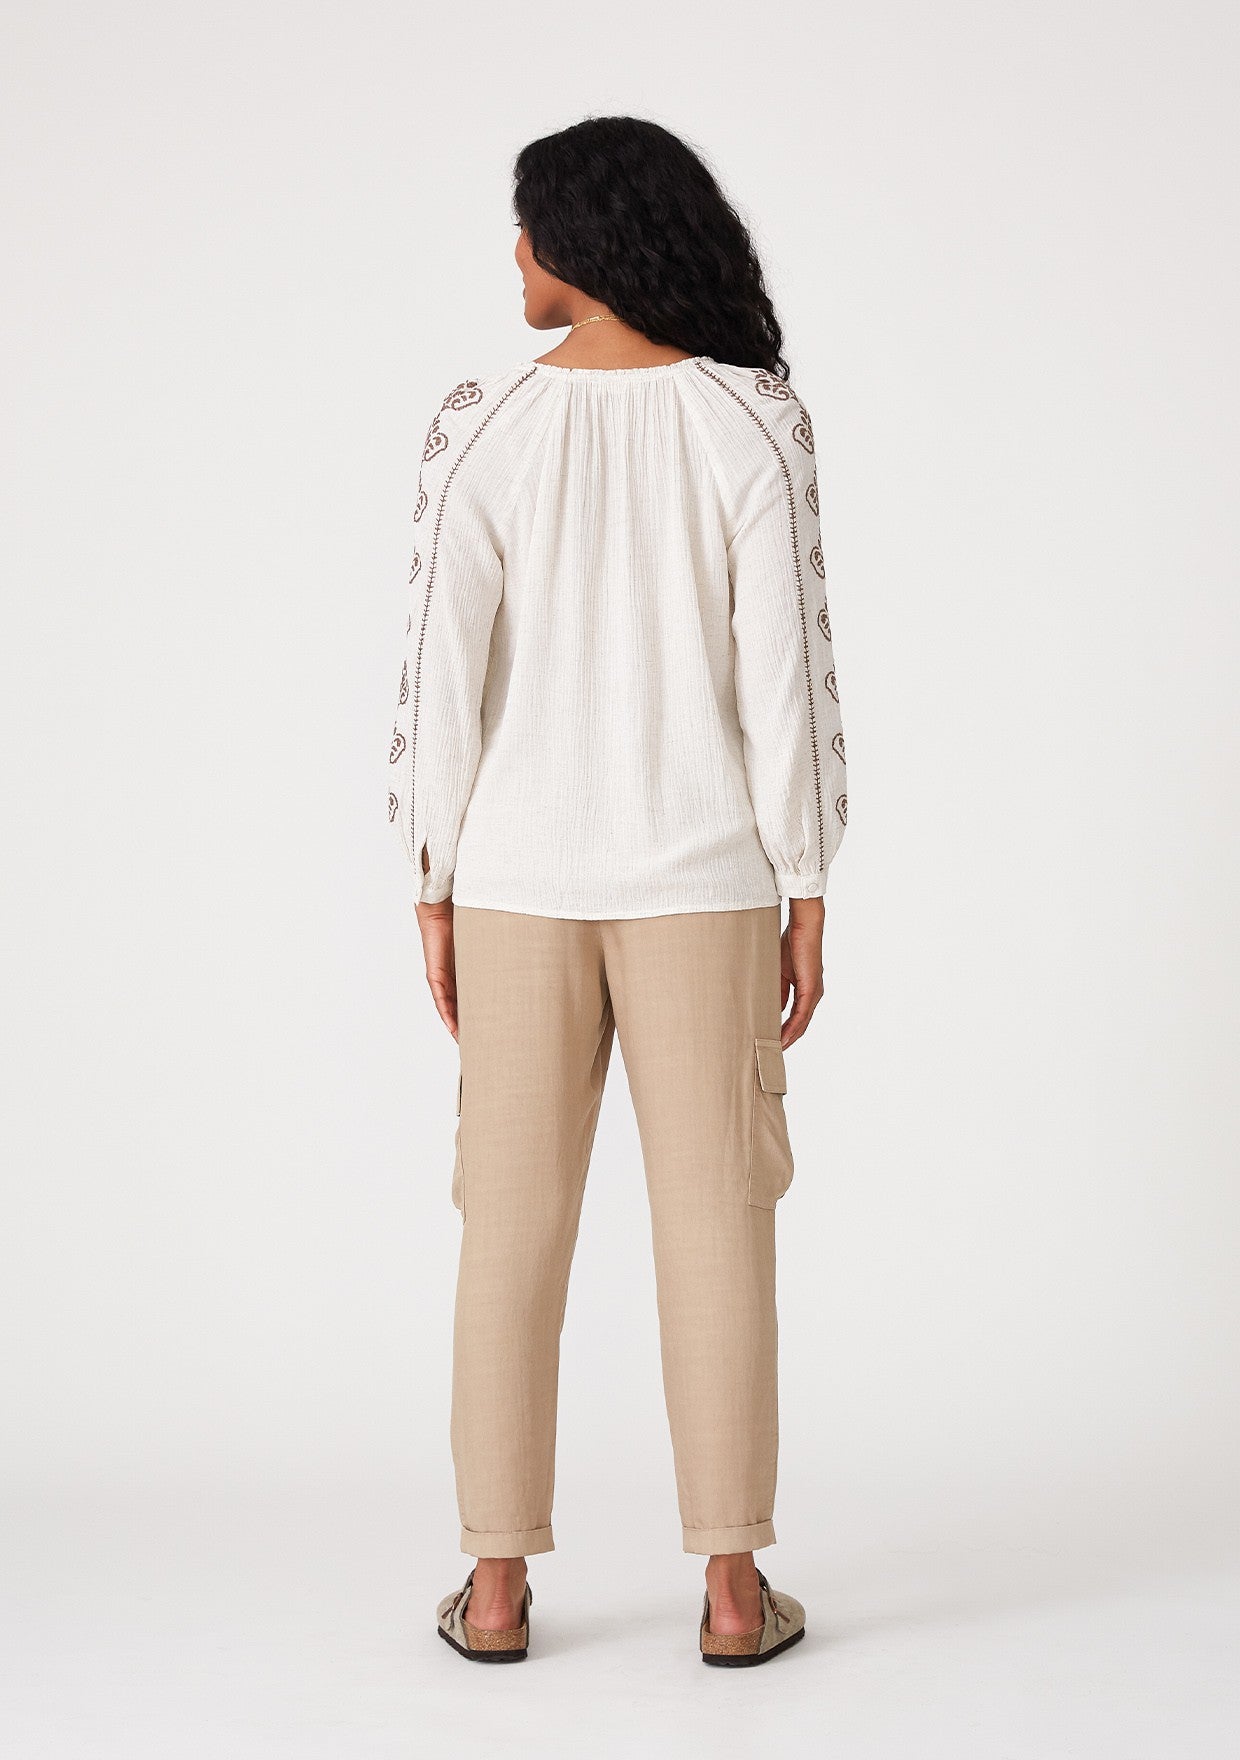 DALEAH EMBROIDERED TOP